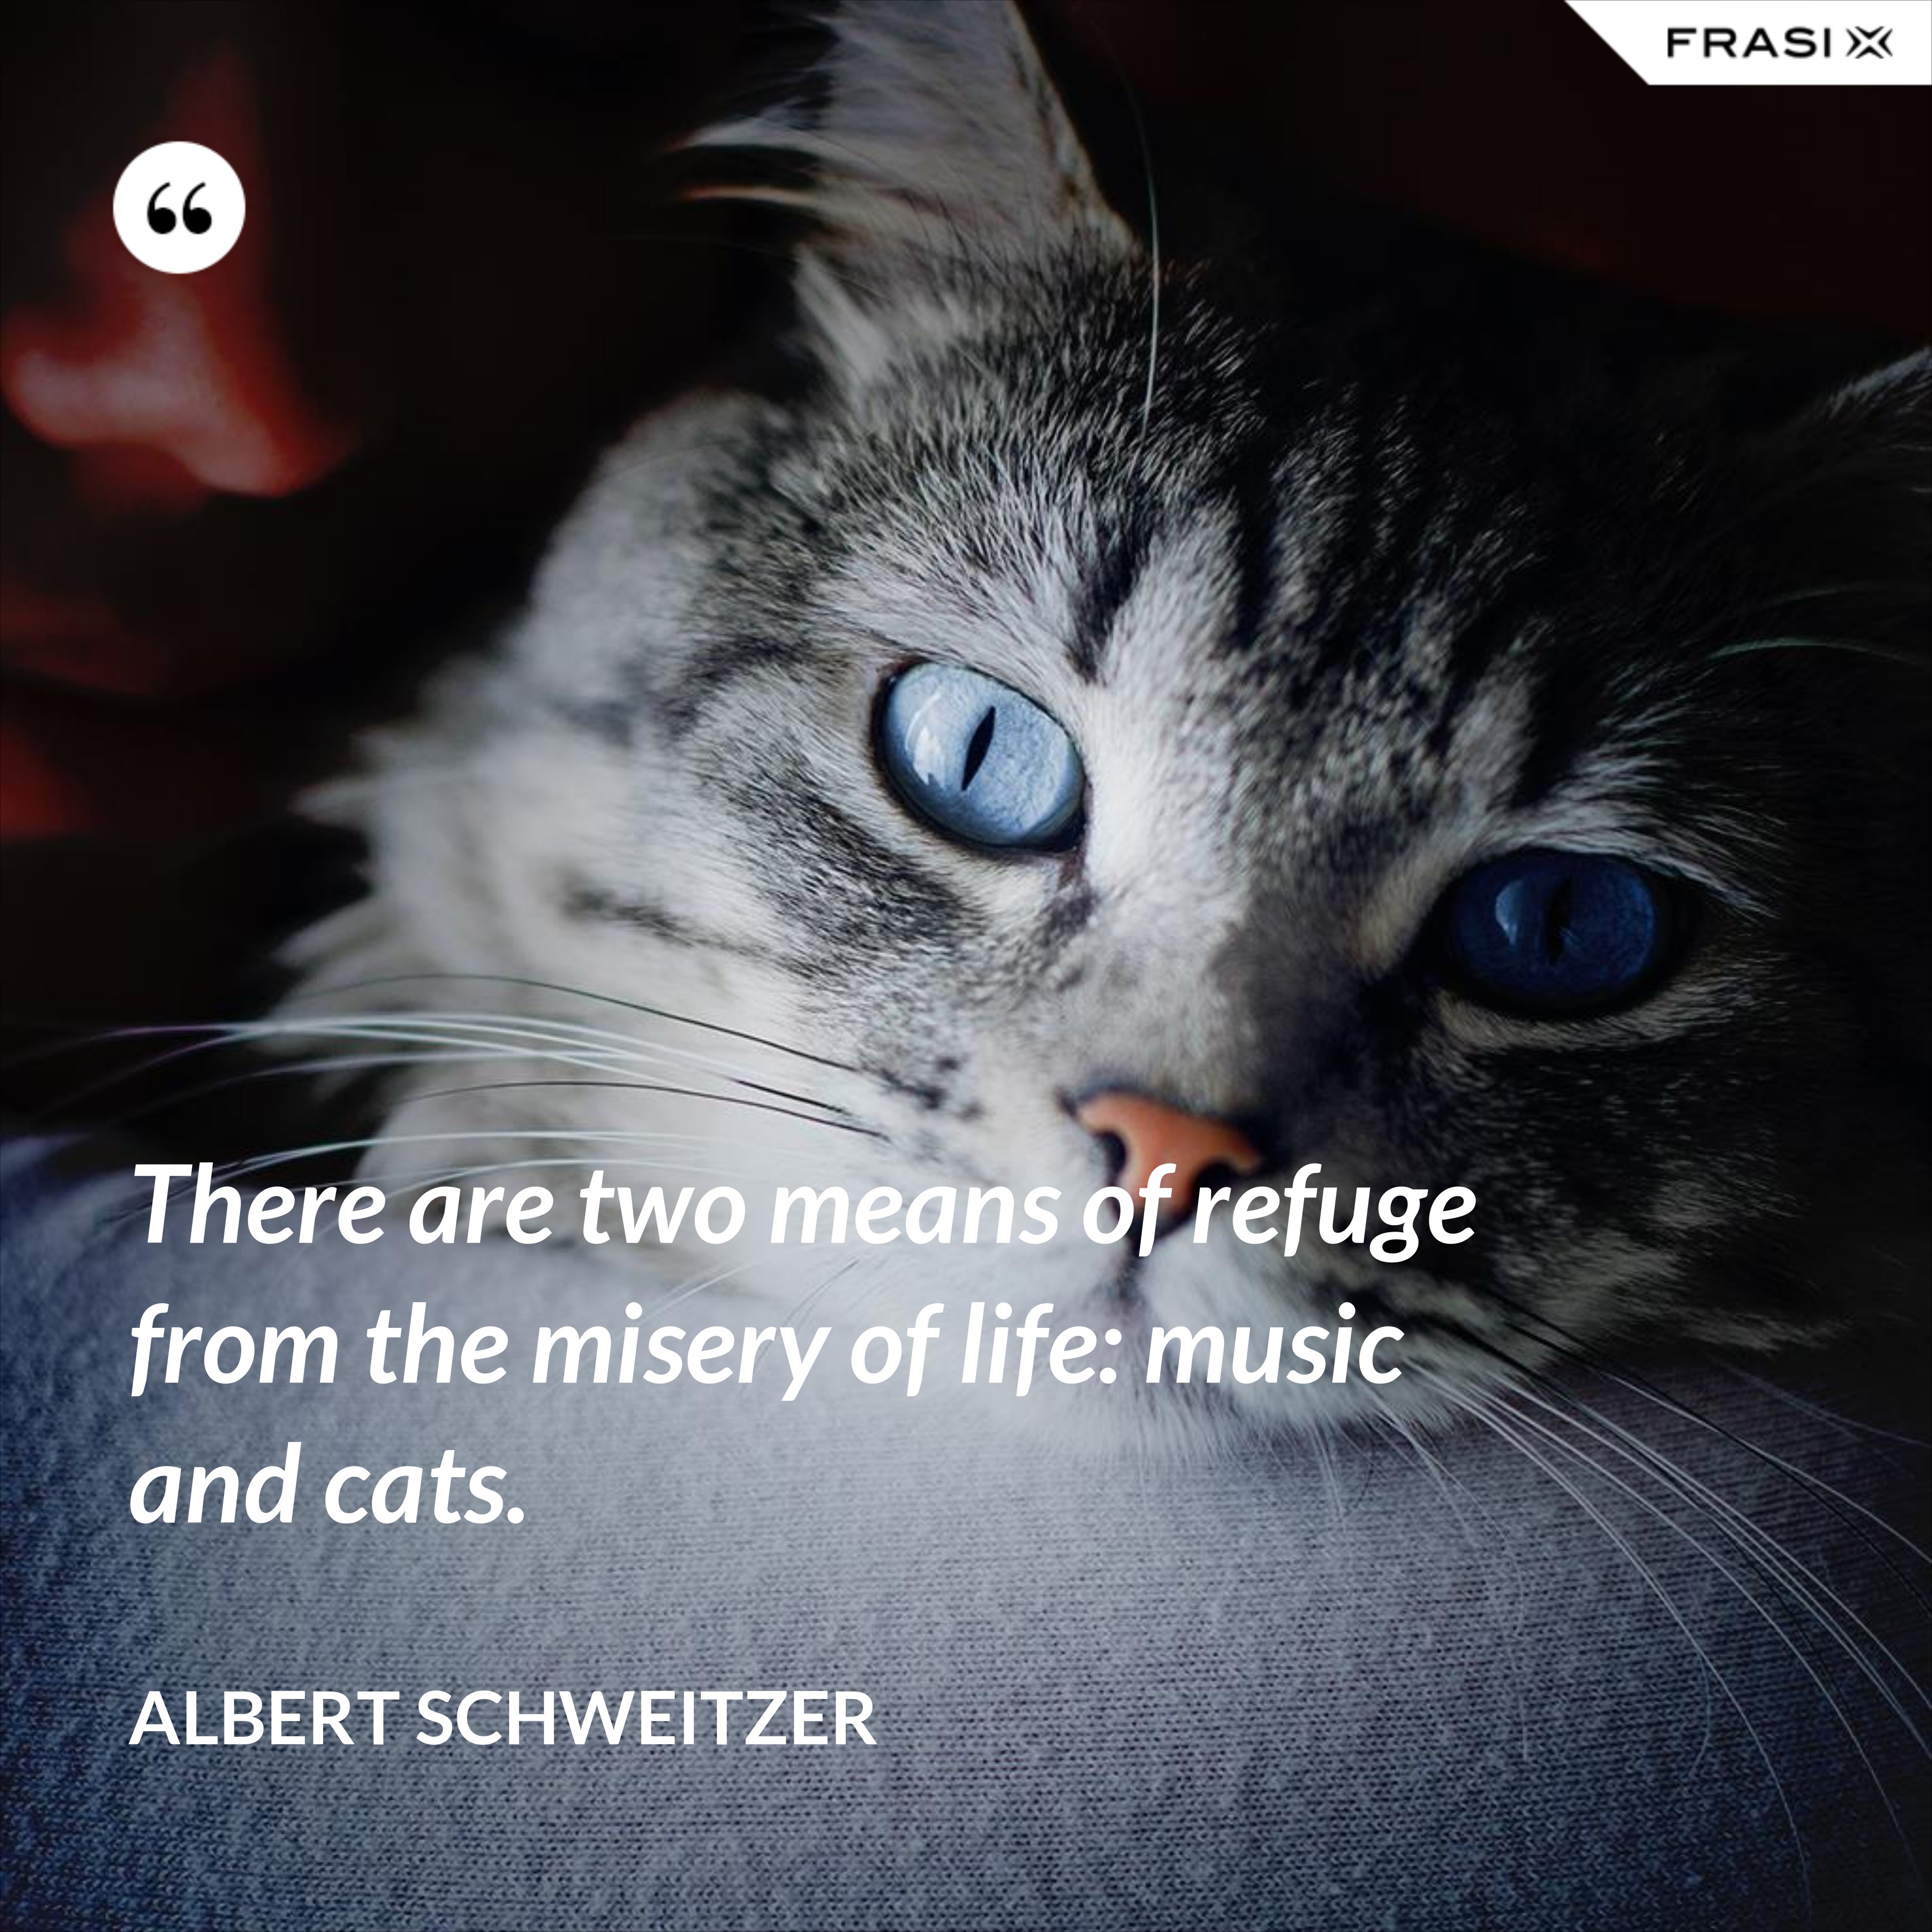 There are two means of refuge from the misery of life: music and cats. - Albert Schweitzer